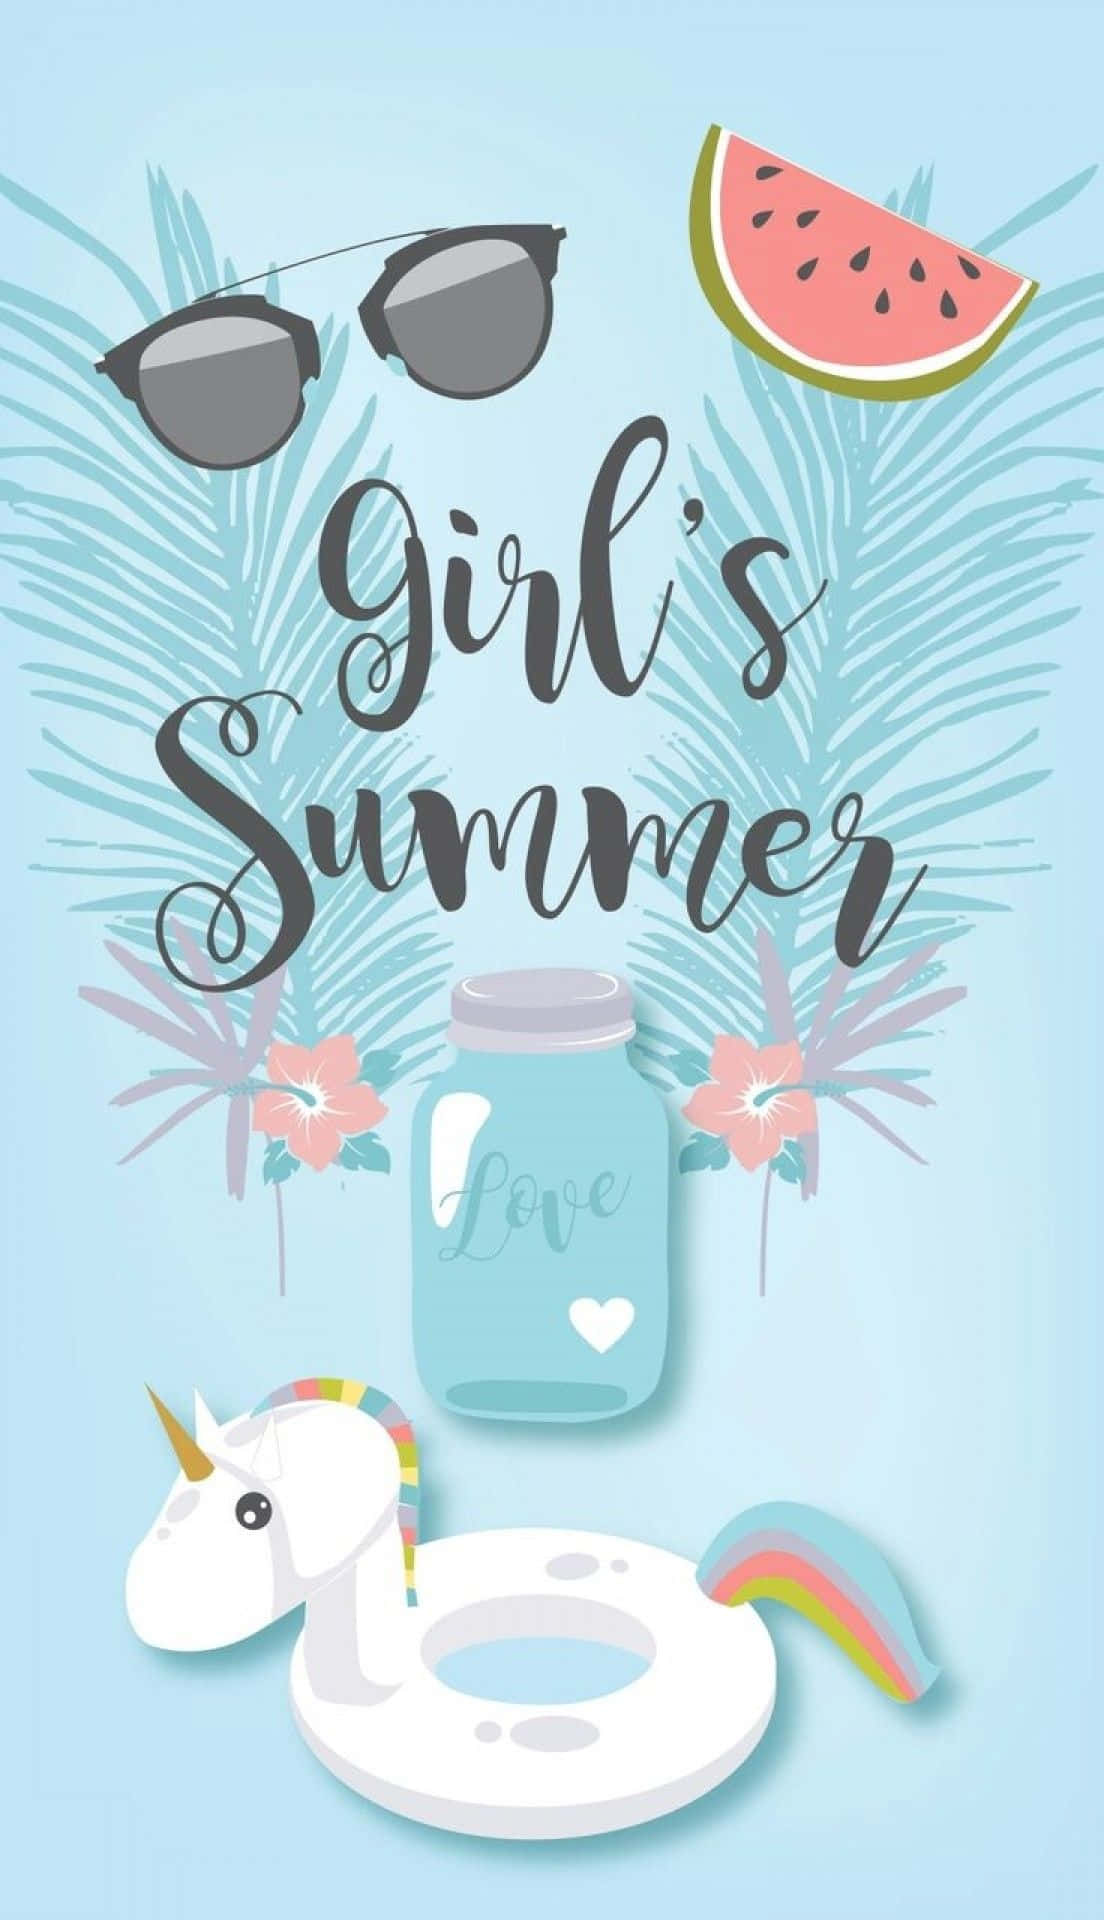 Girl's Summer Card With Sunglasses, A Unicorn, And A Hat Wallpaper